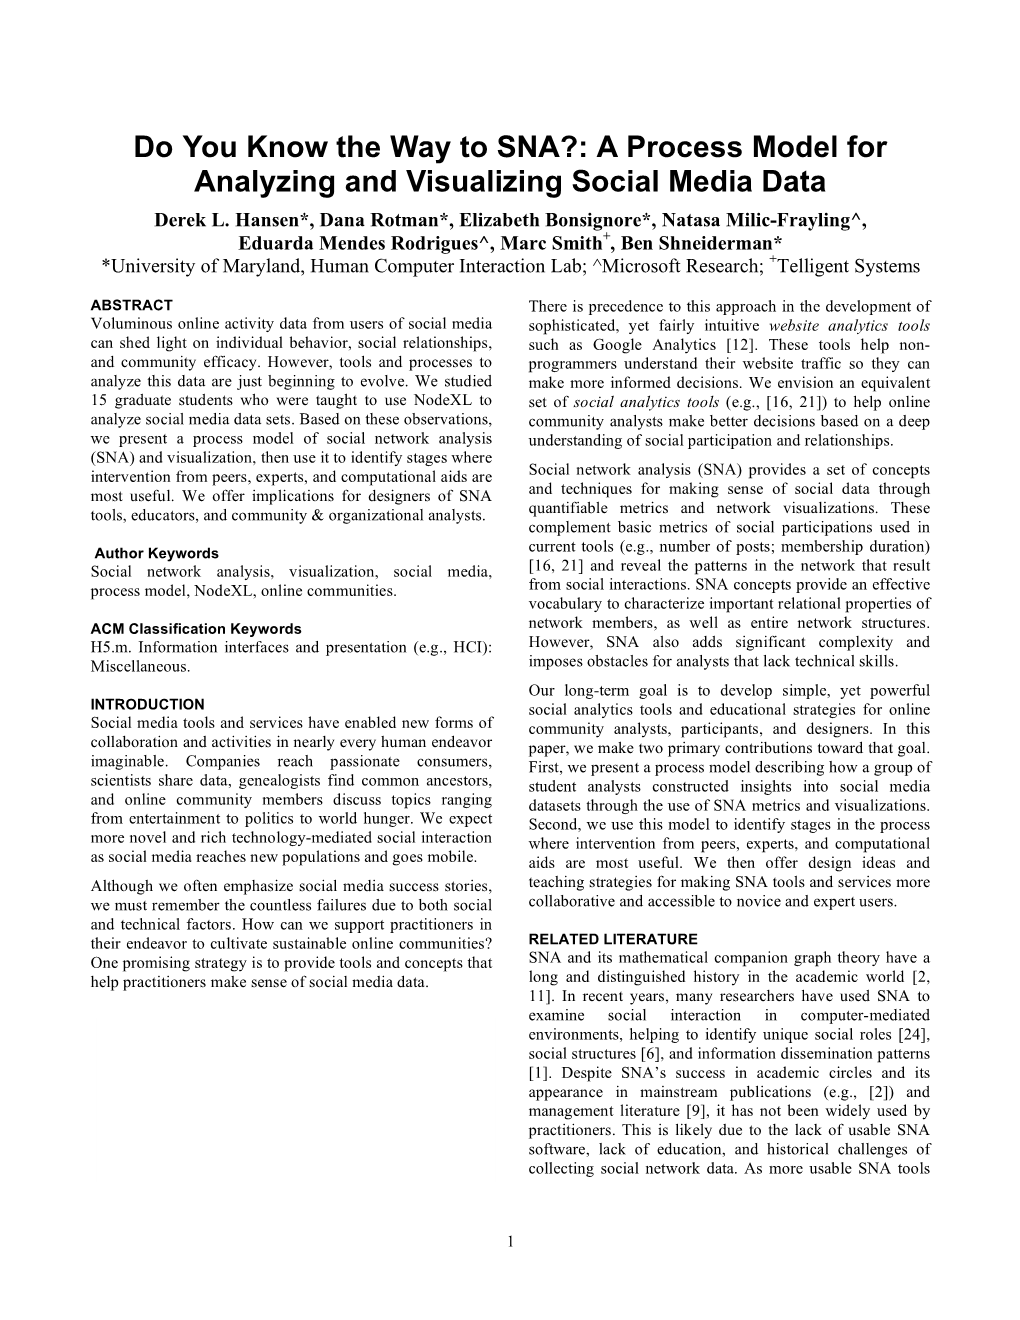 Do You Know the Way to SNA?: a Process Model for Analyzing and Visualizing Social Media Data Derek L